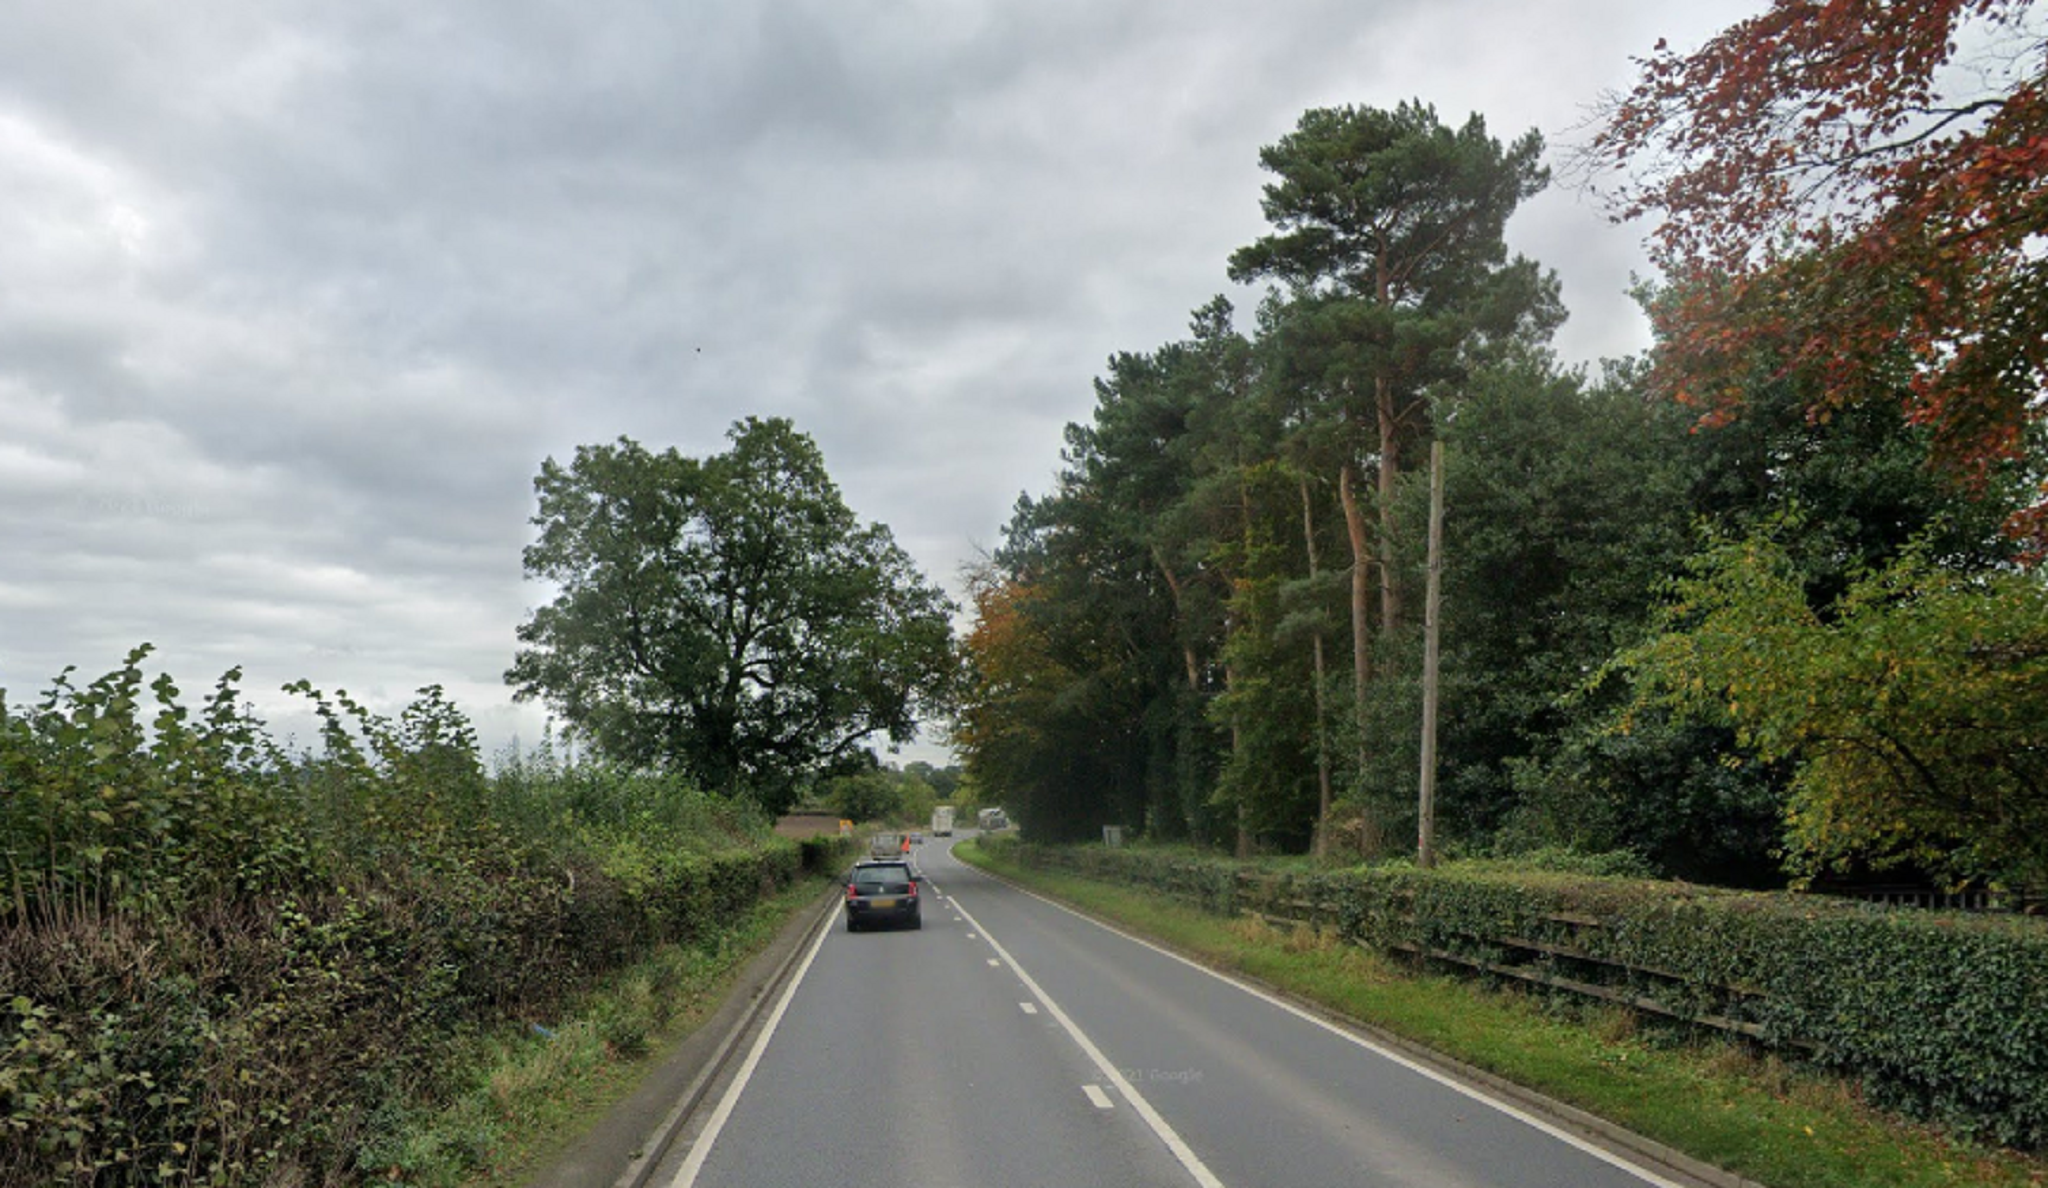 The crash happened along the A52 Ashbourne bypass n Derbyshire